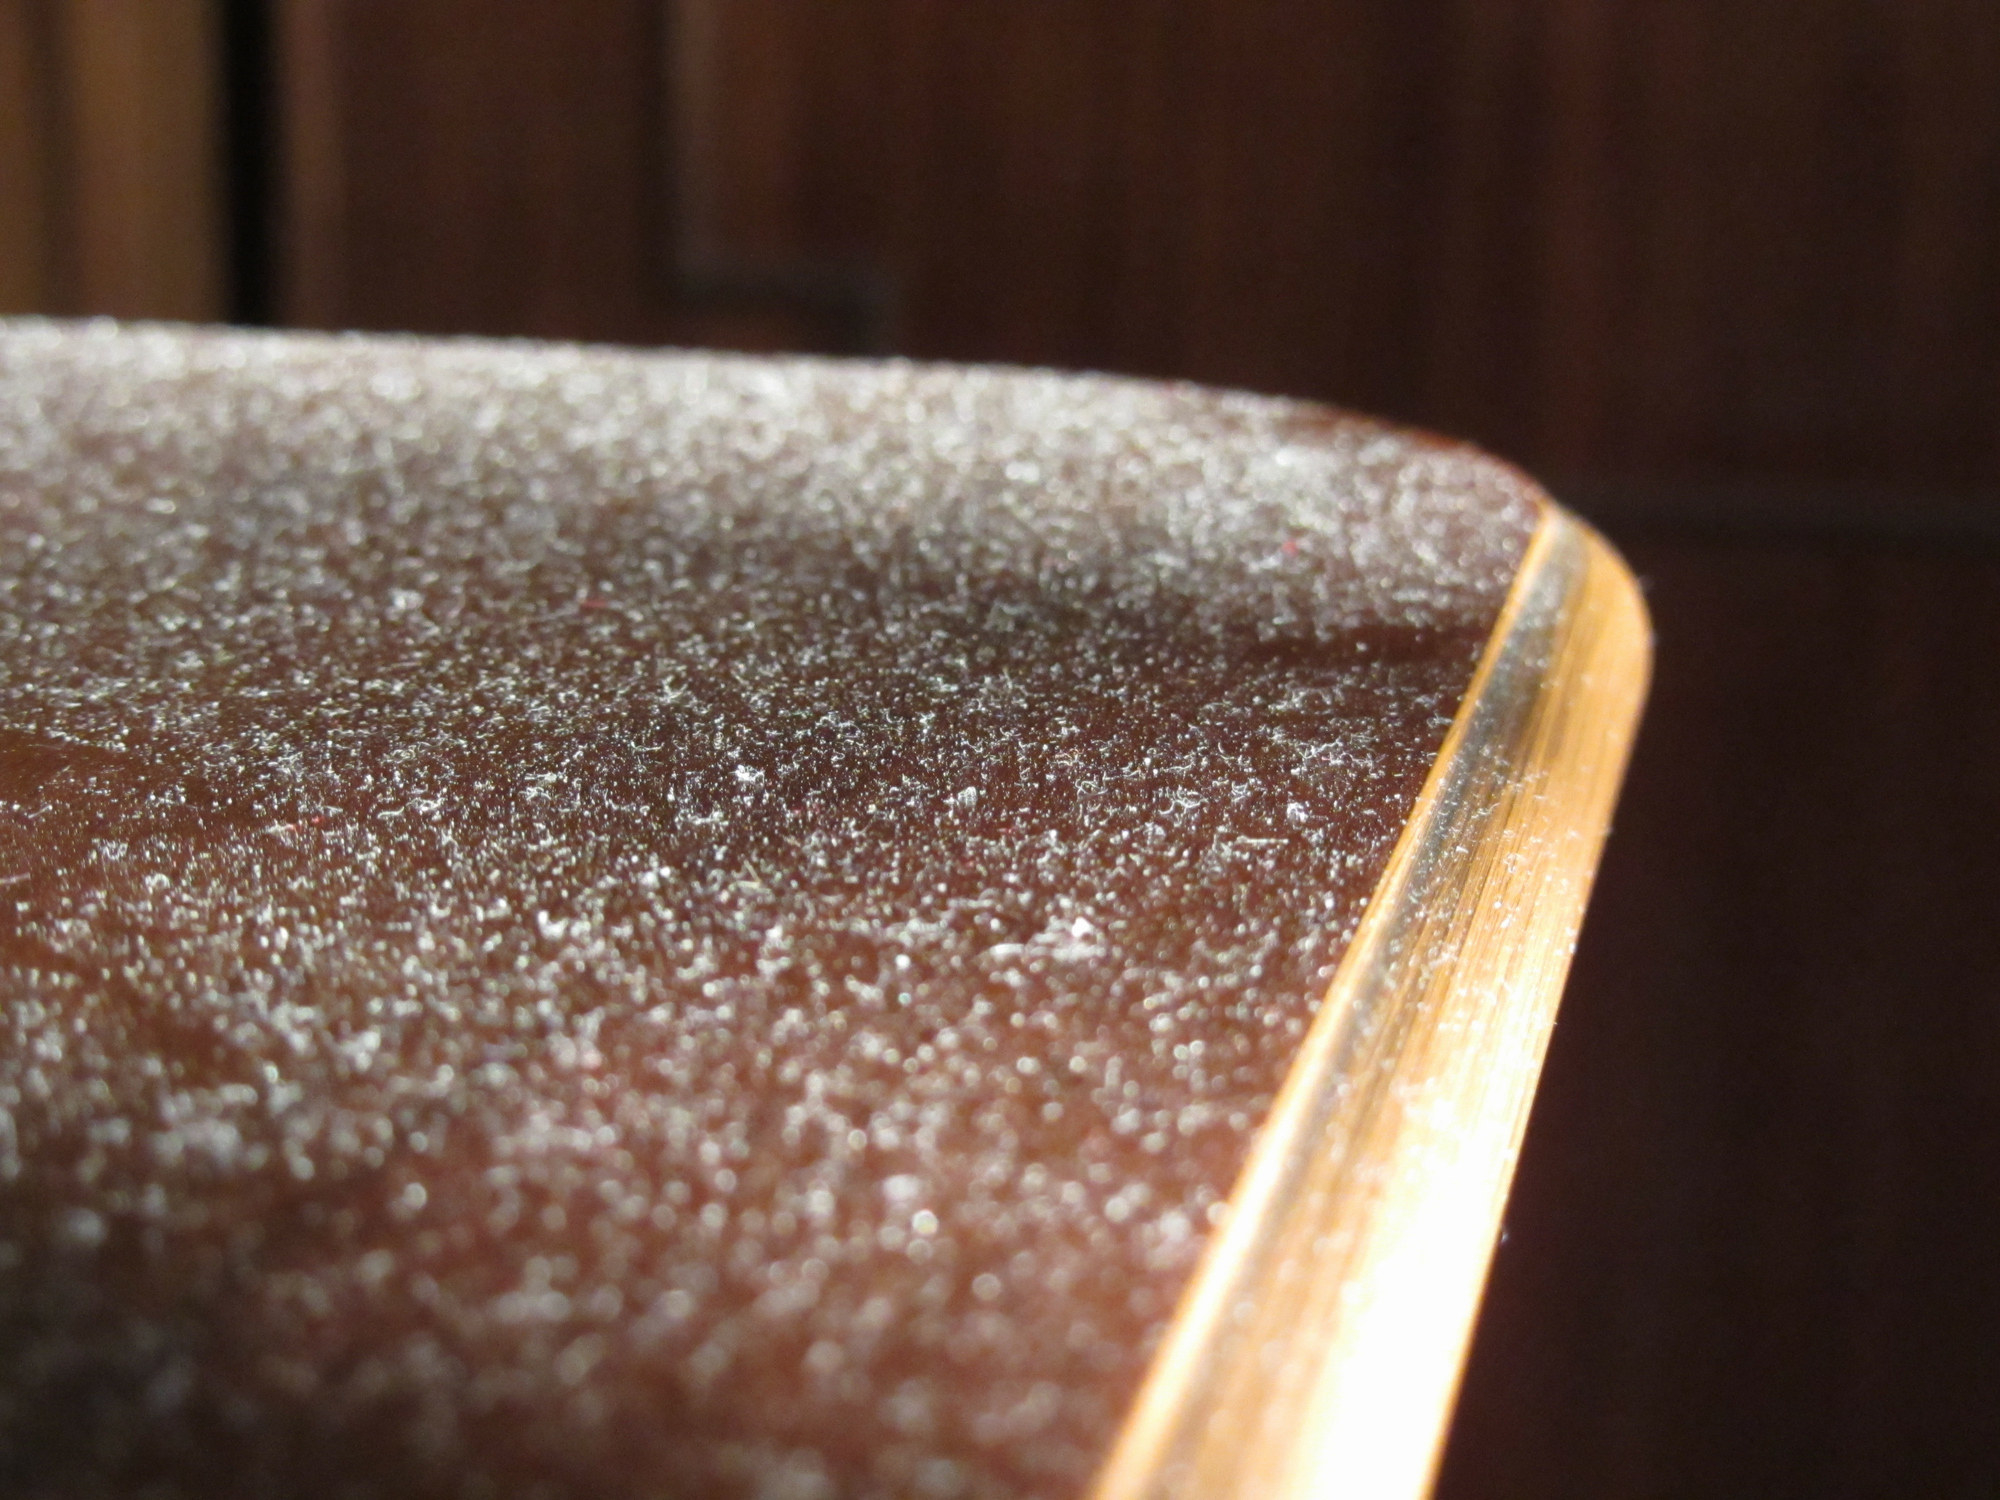 A close-up of a dusty wooden surface corner, highlighting the accumulation of dust particles. No people or significant color details visible